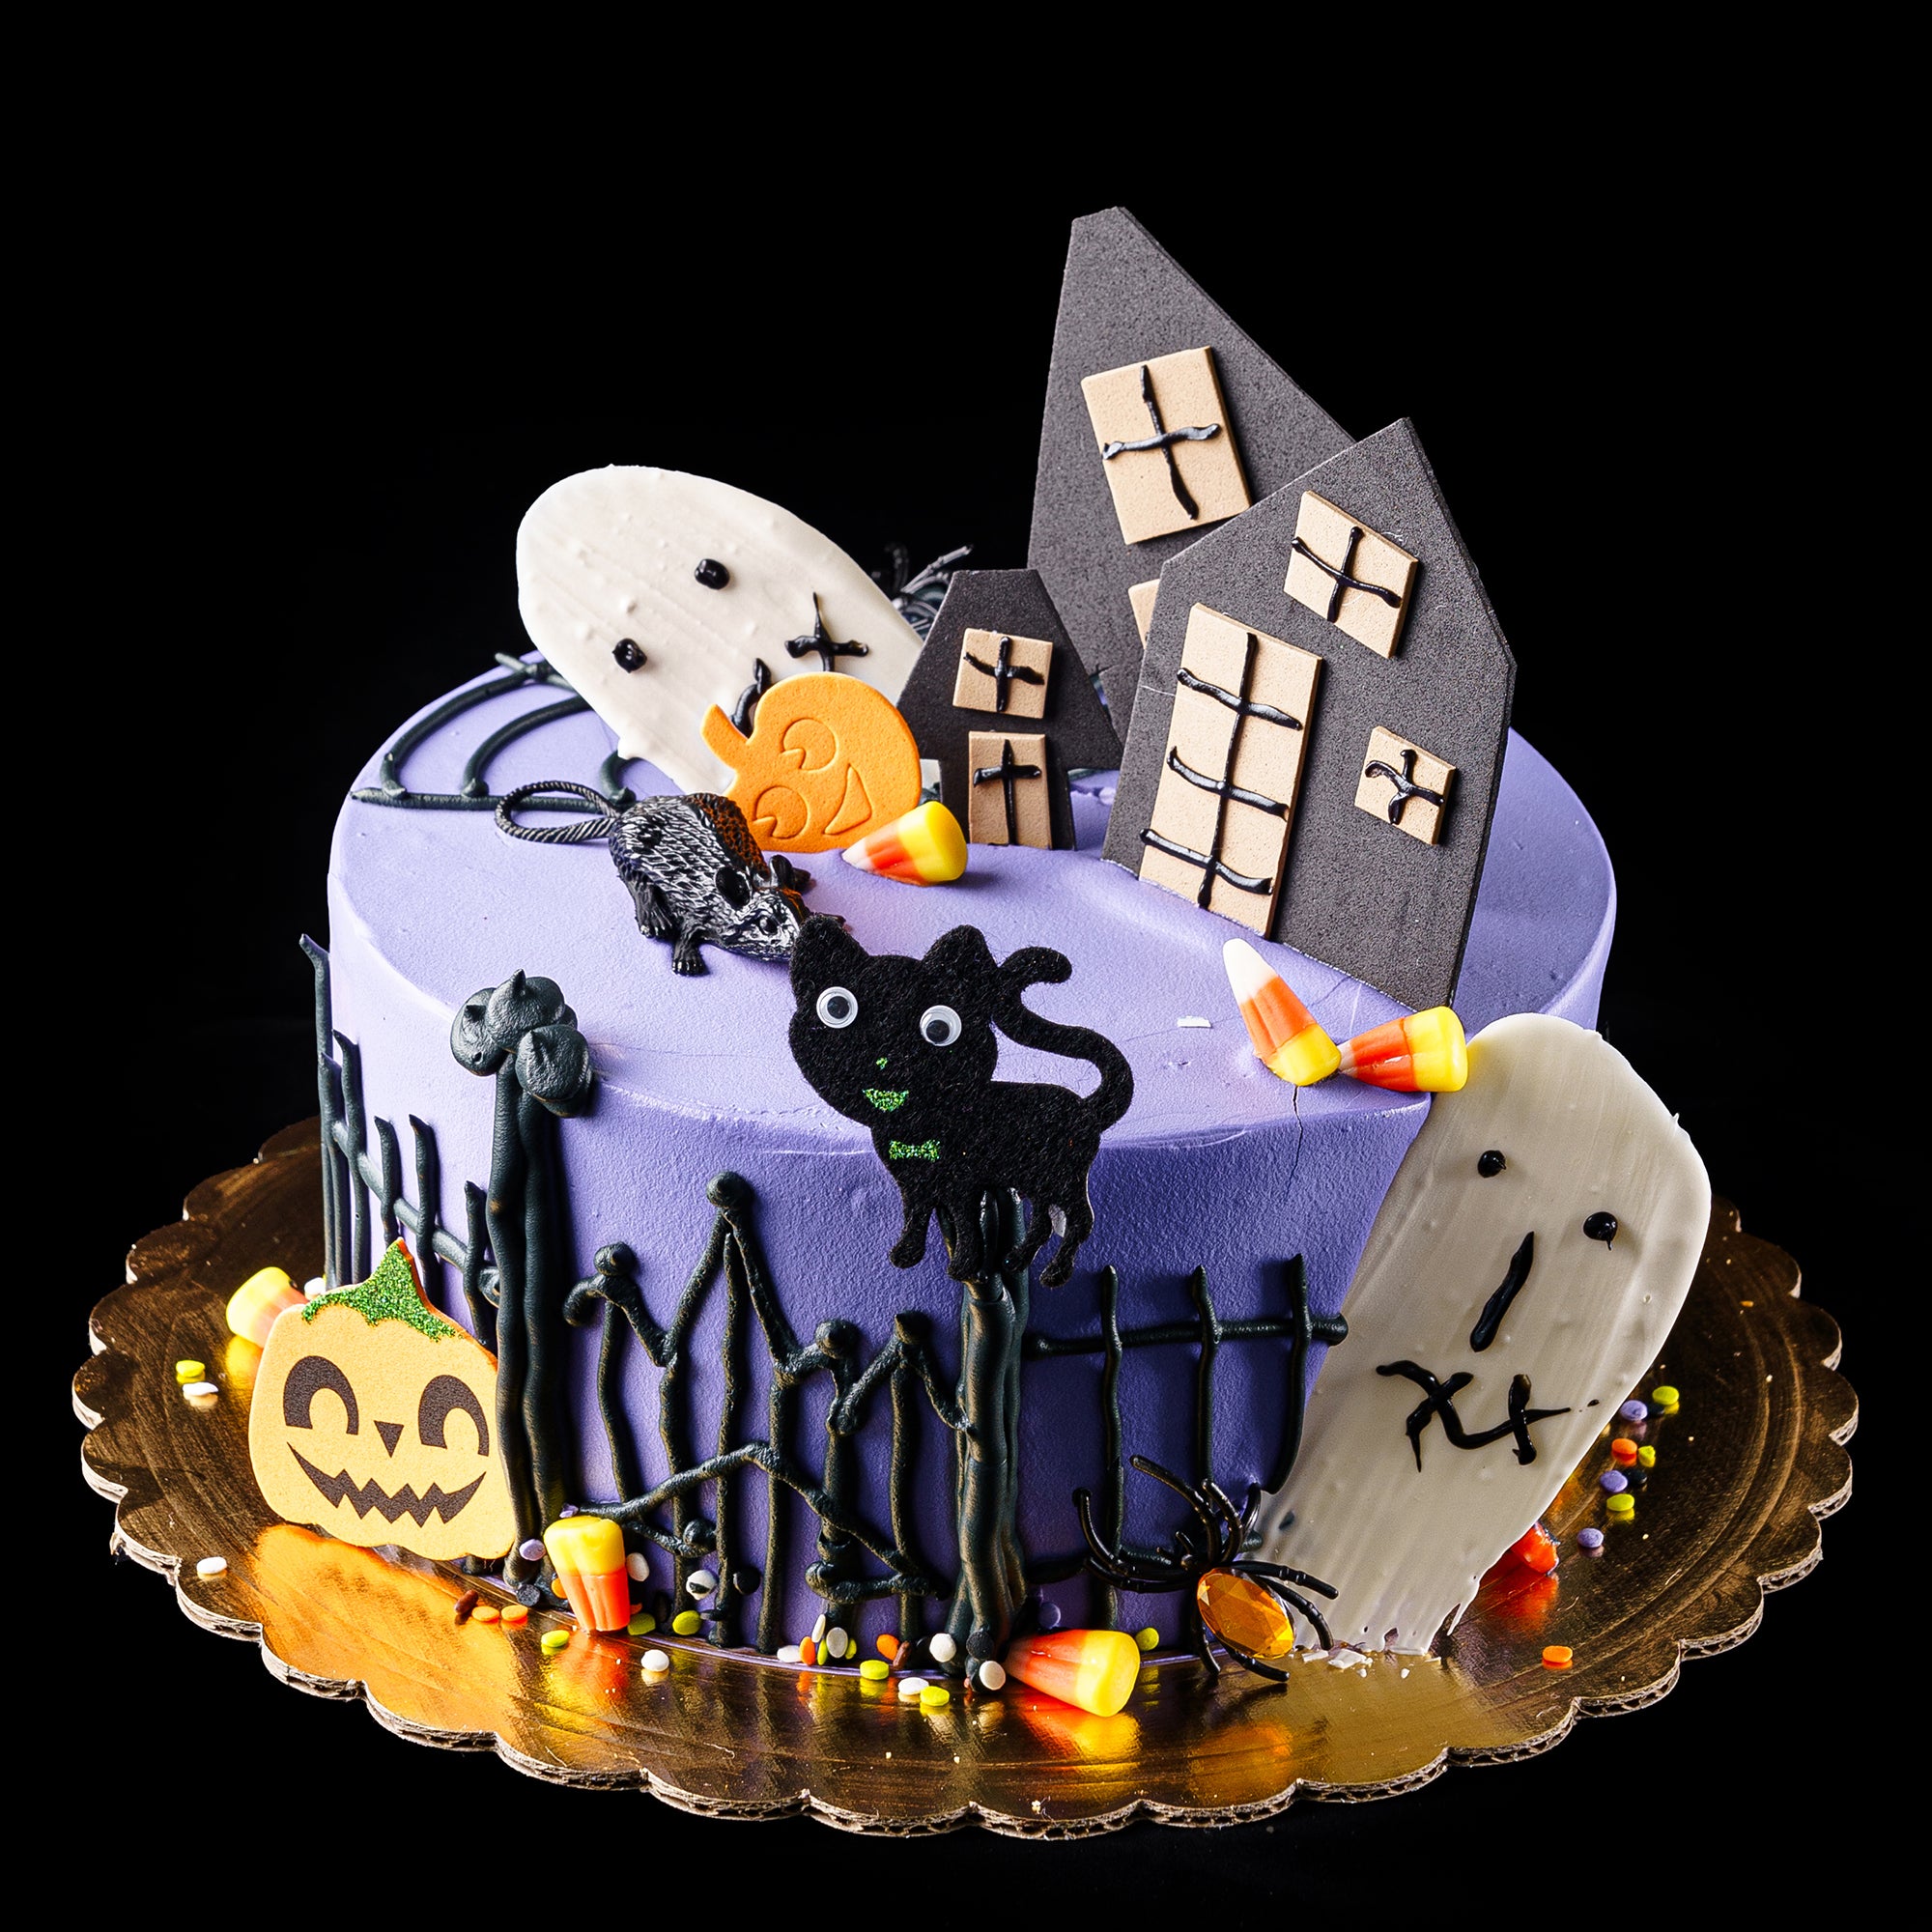 20 Incredible Halloween Cakes That Are Deliciously Spooky! | Halloween cakes,  Halloween cake decorating, Halloween birthday cakes